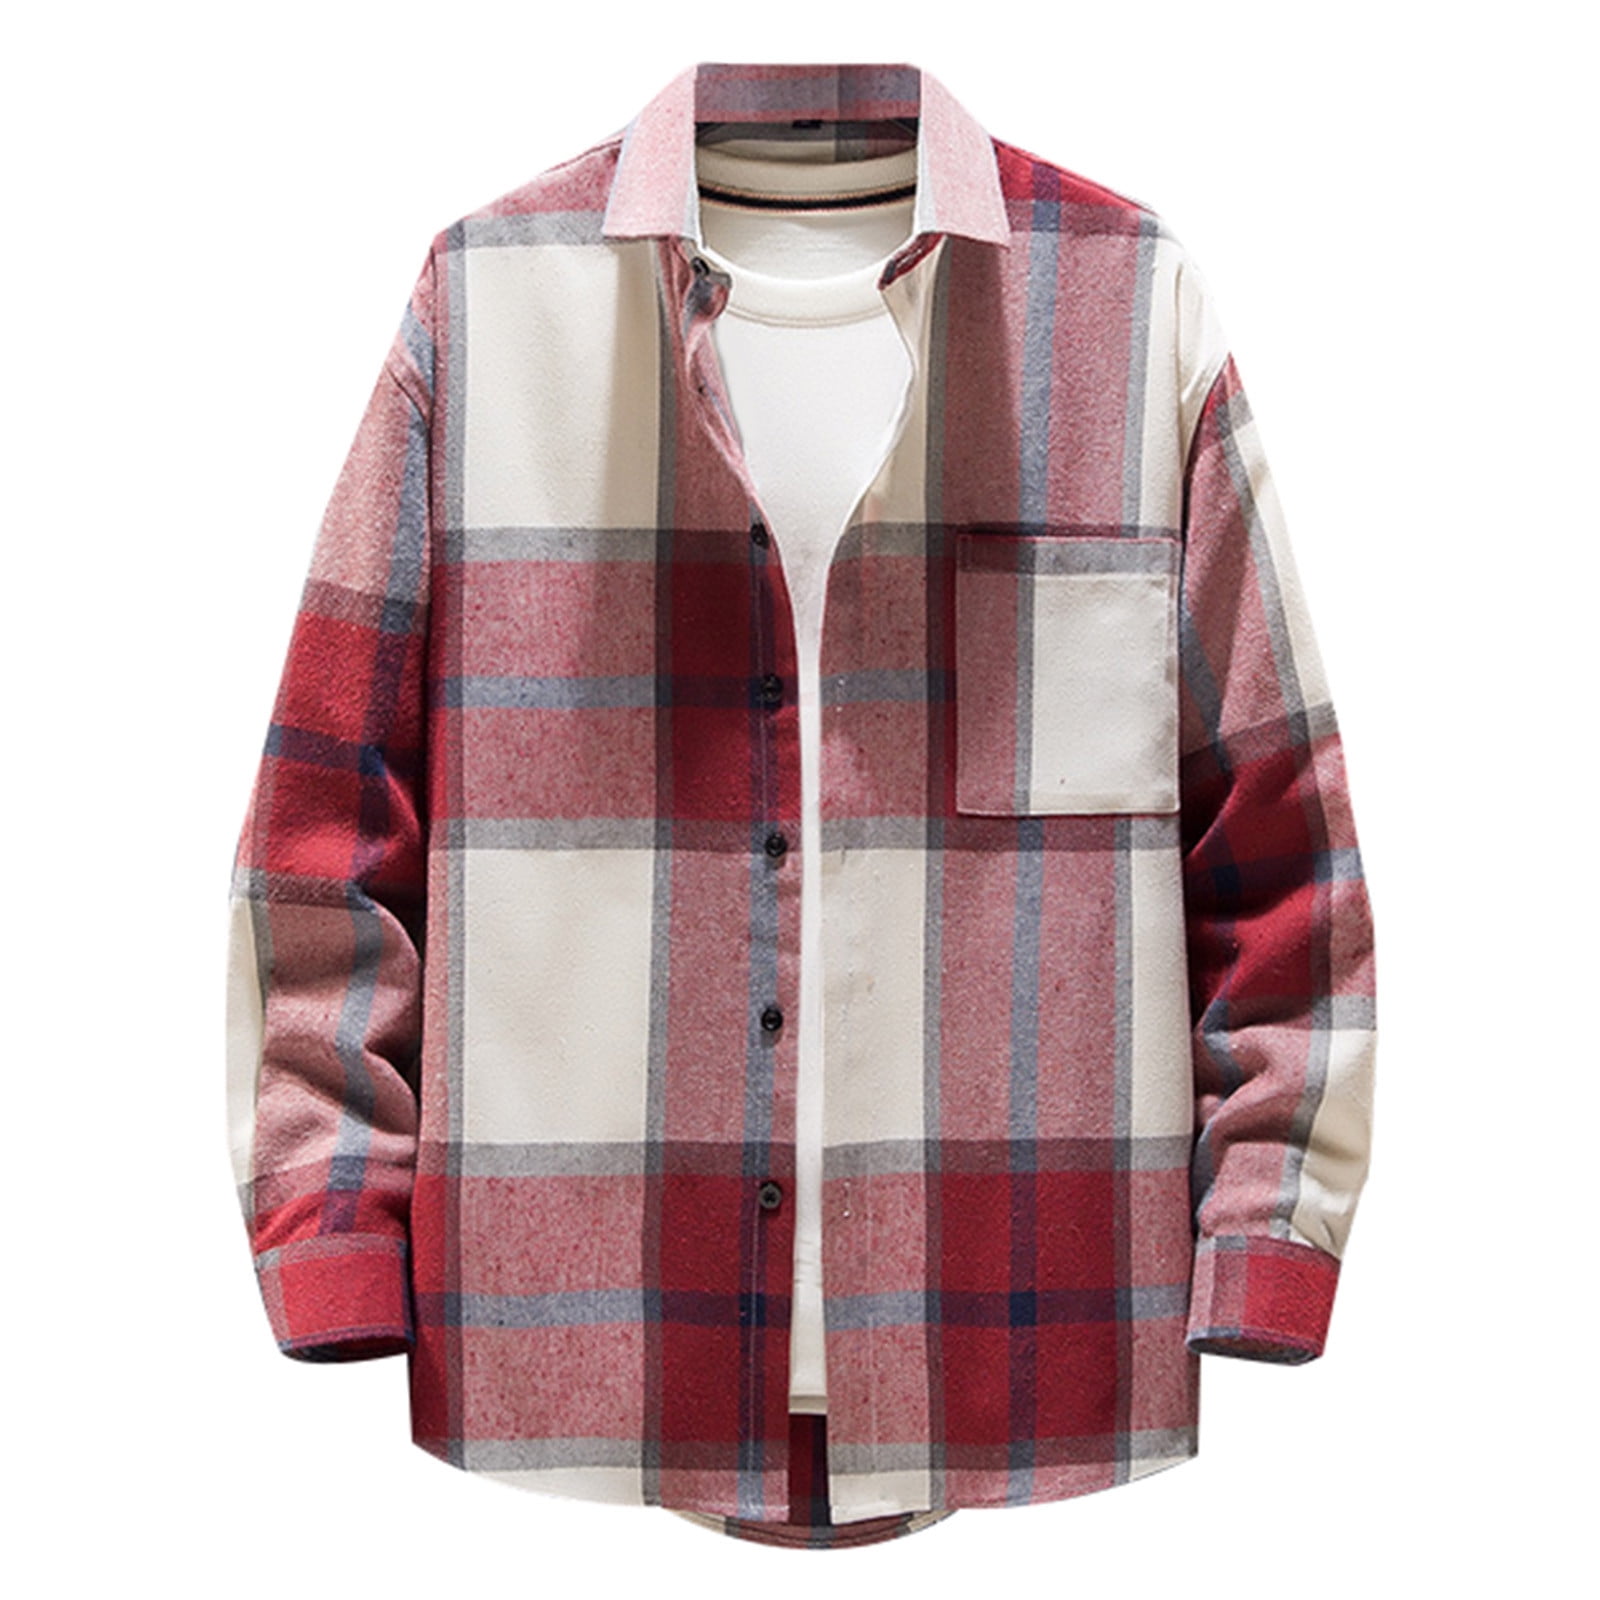 Dezsed Shacket Jacket Men Clearance Men's Single-breasted Casual Plaid ...